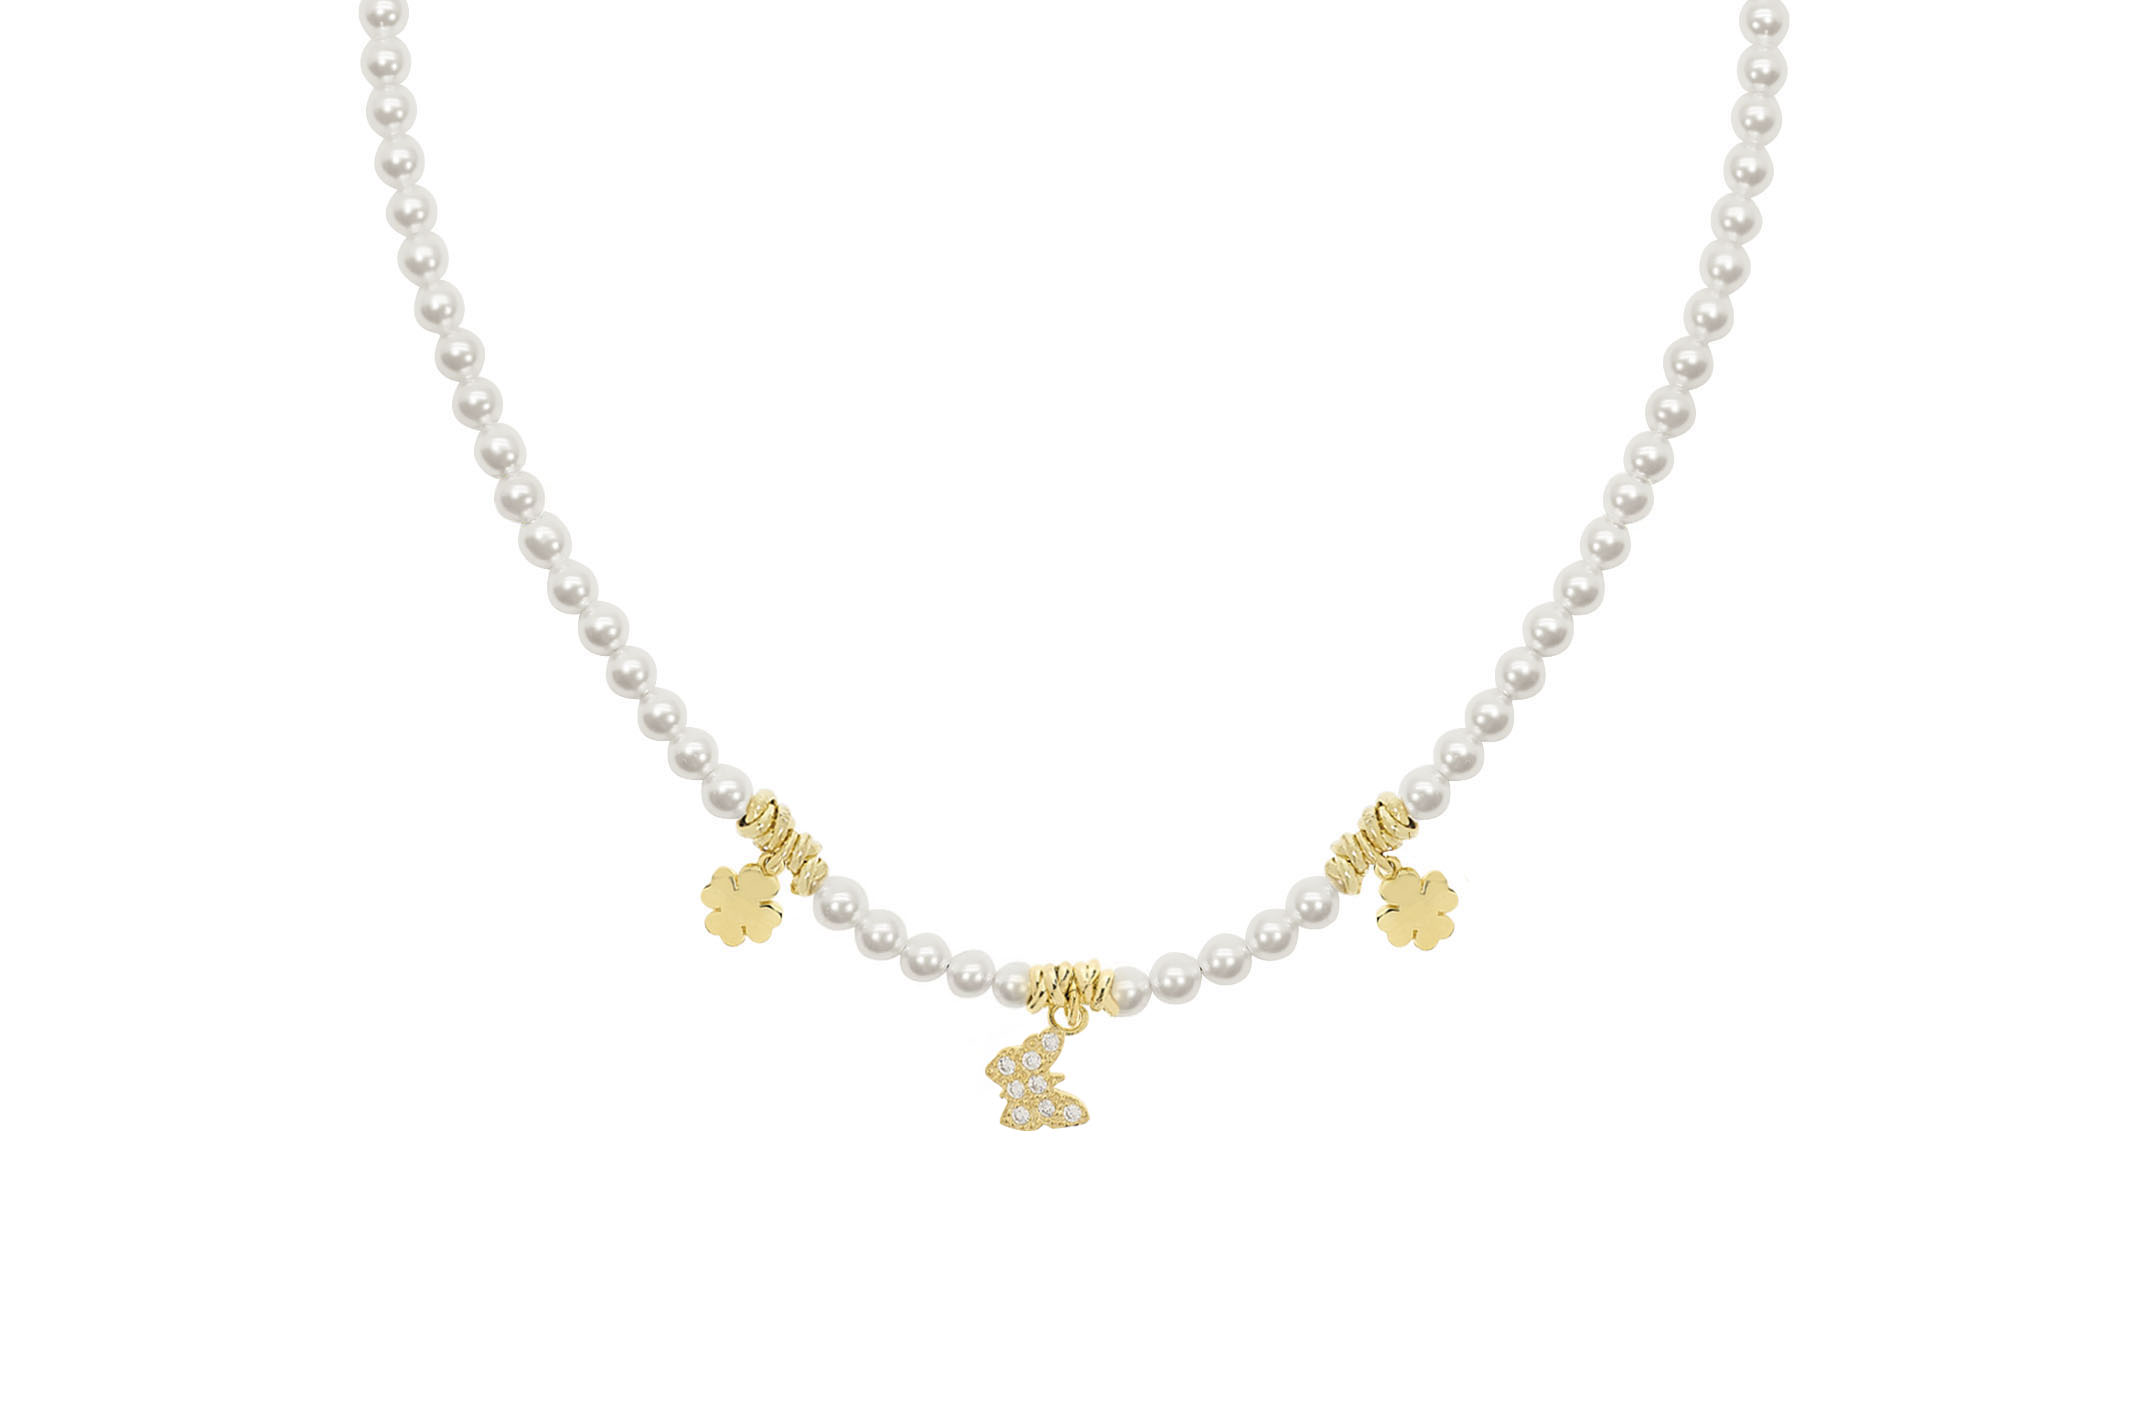 Jewel: necklace;Material: silver 925;Weight: 21 gr;Stone: pearl & zirconia;Color: yellow;Size: 40 cm + 4 cm;Pendent size: 0.5 cm